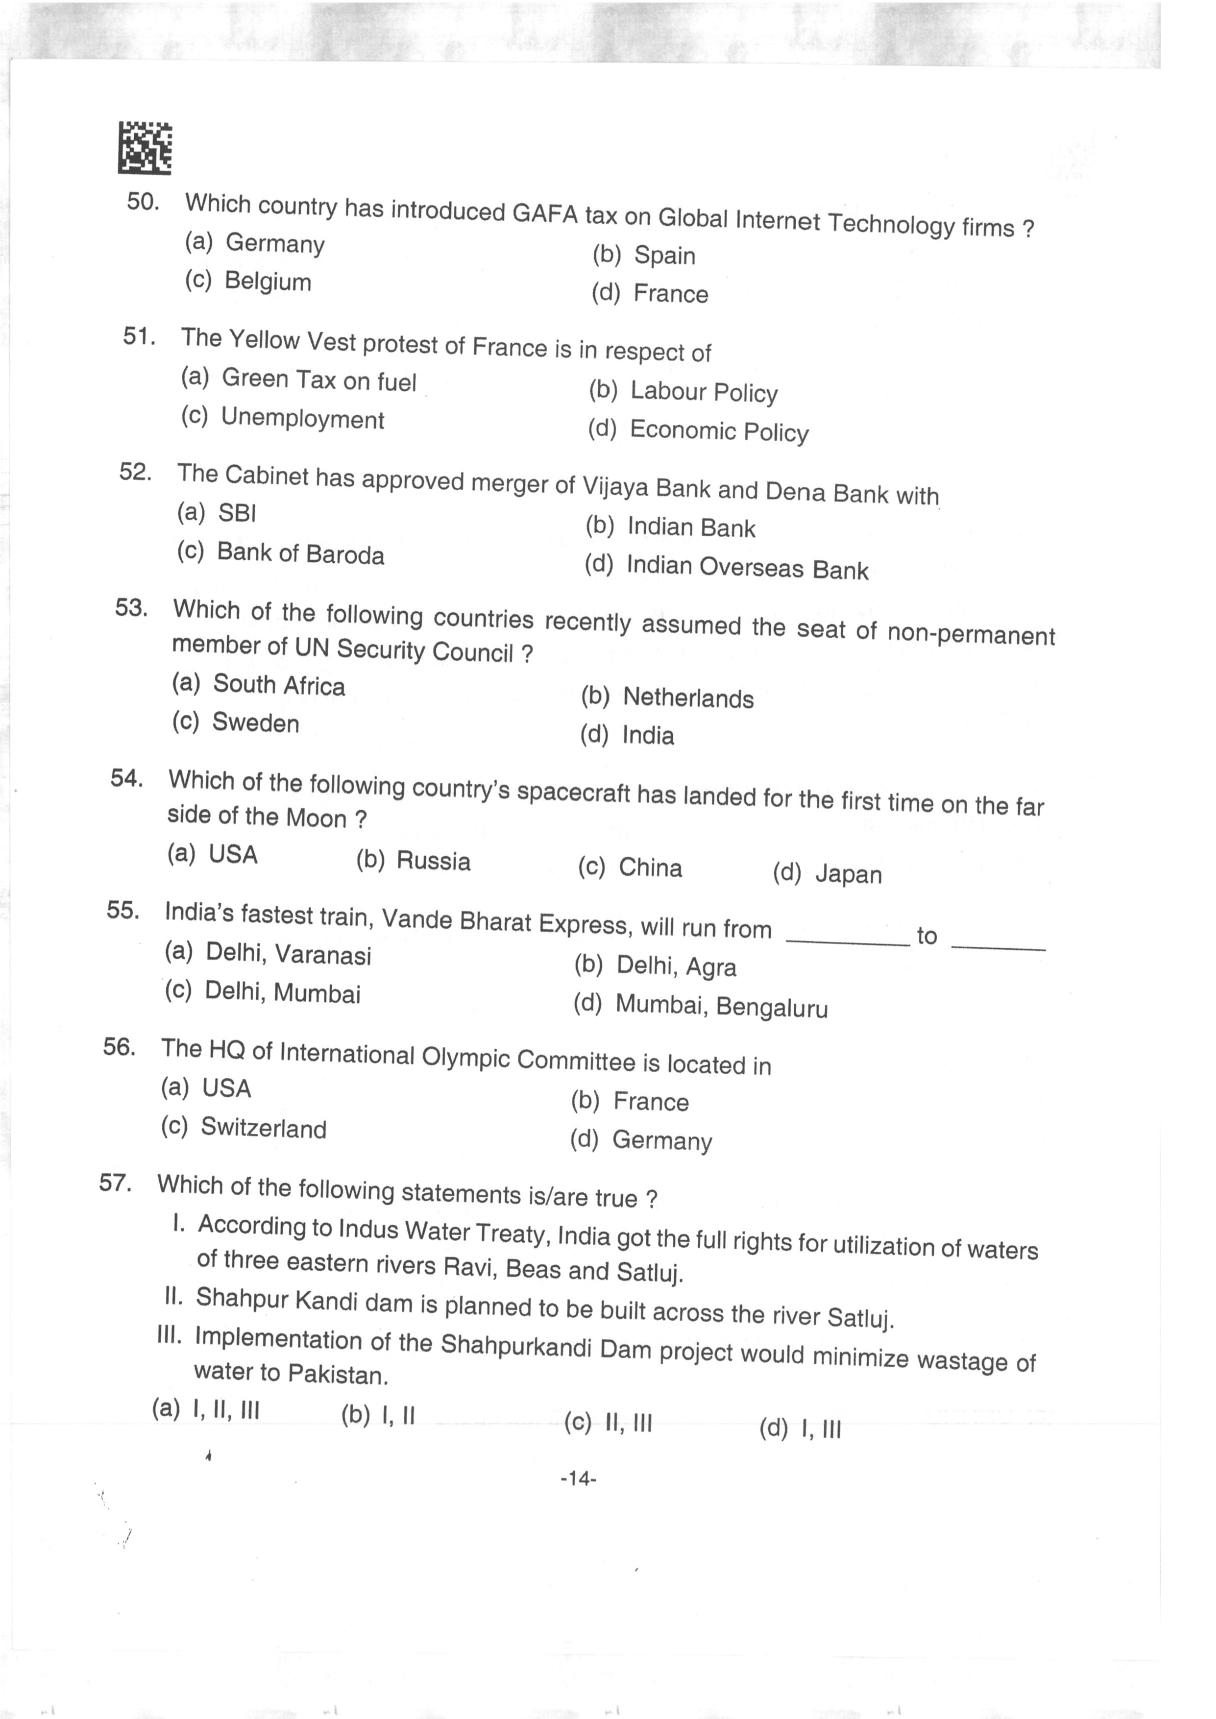 AILET 2019 Question Paper for BA LLB - Page 14